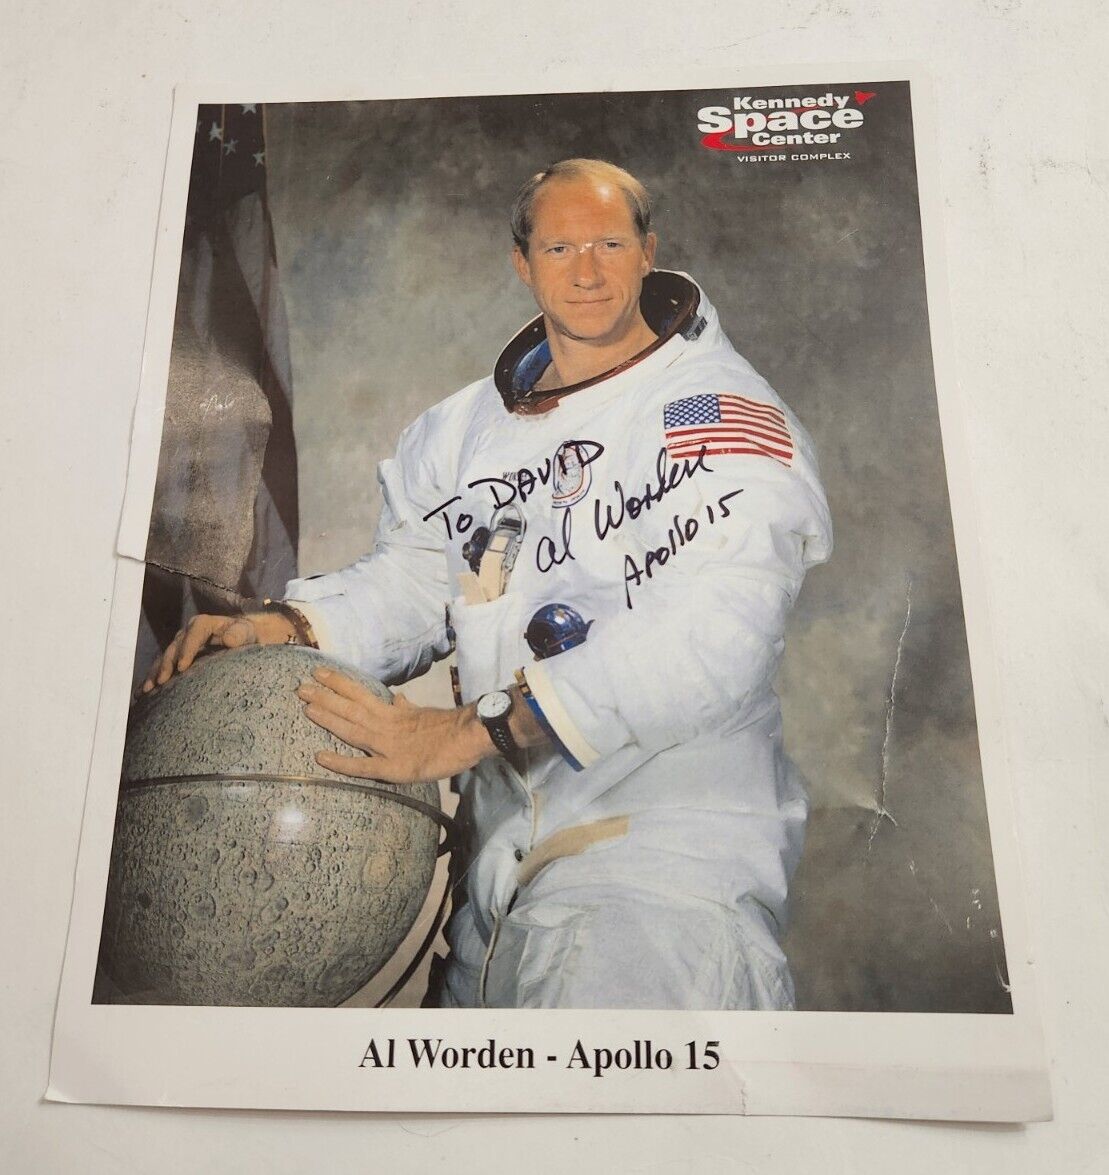 AL WORDEN APOLLO 15 SIGNED PHOTOGRAPHIC PRINT PERSONALIZED AND DAMAGED NASA